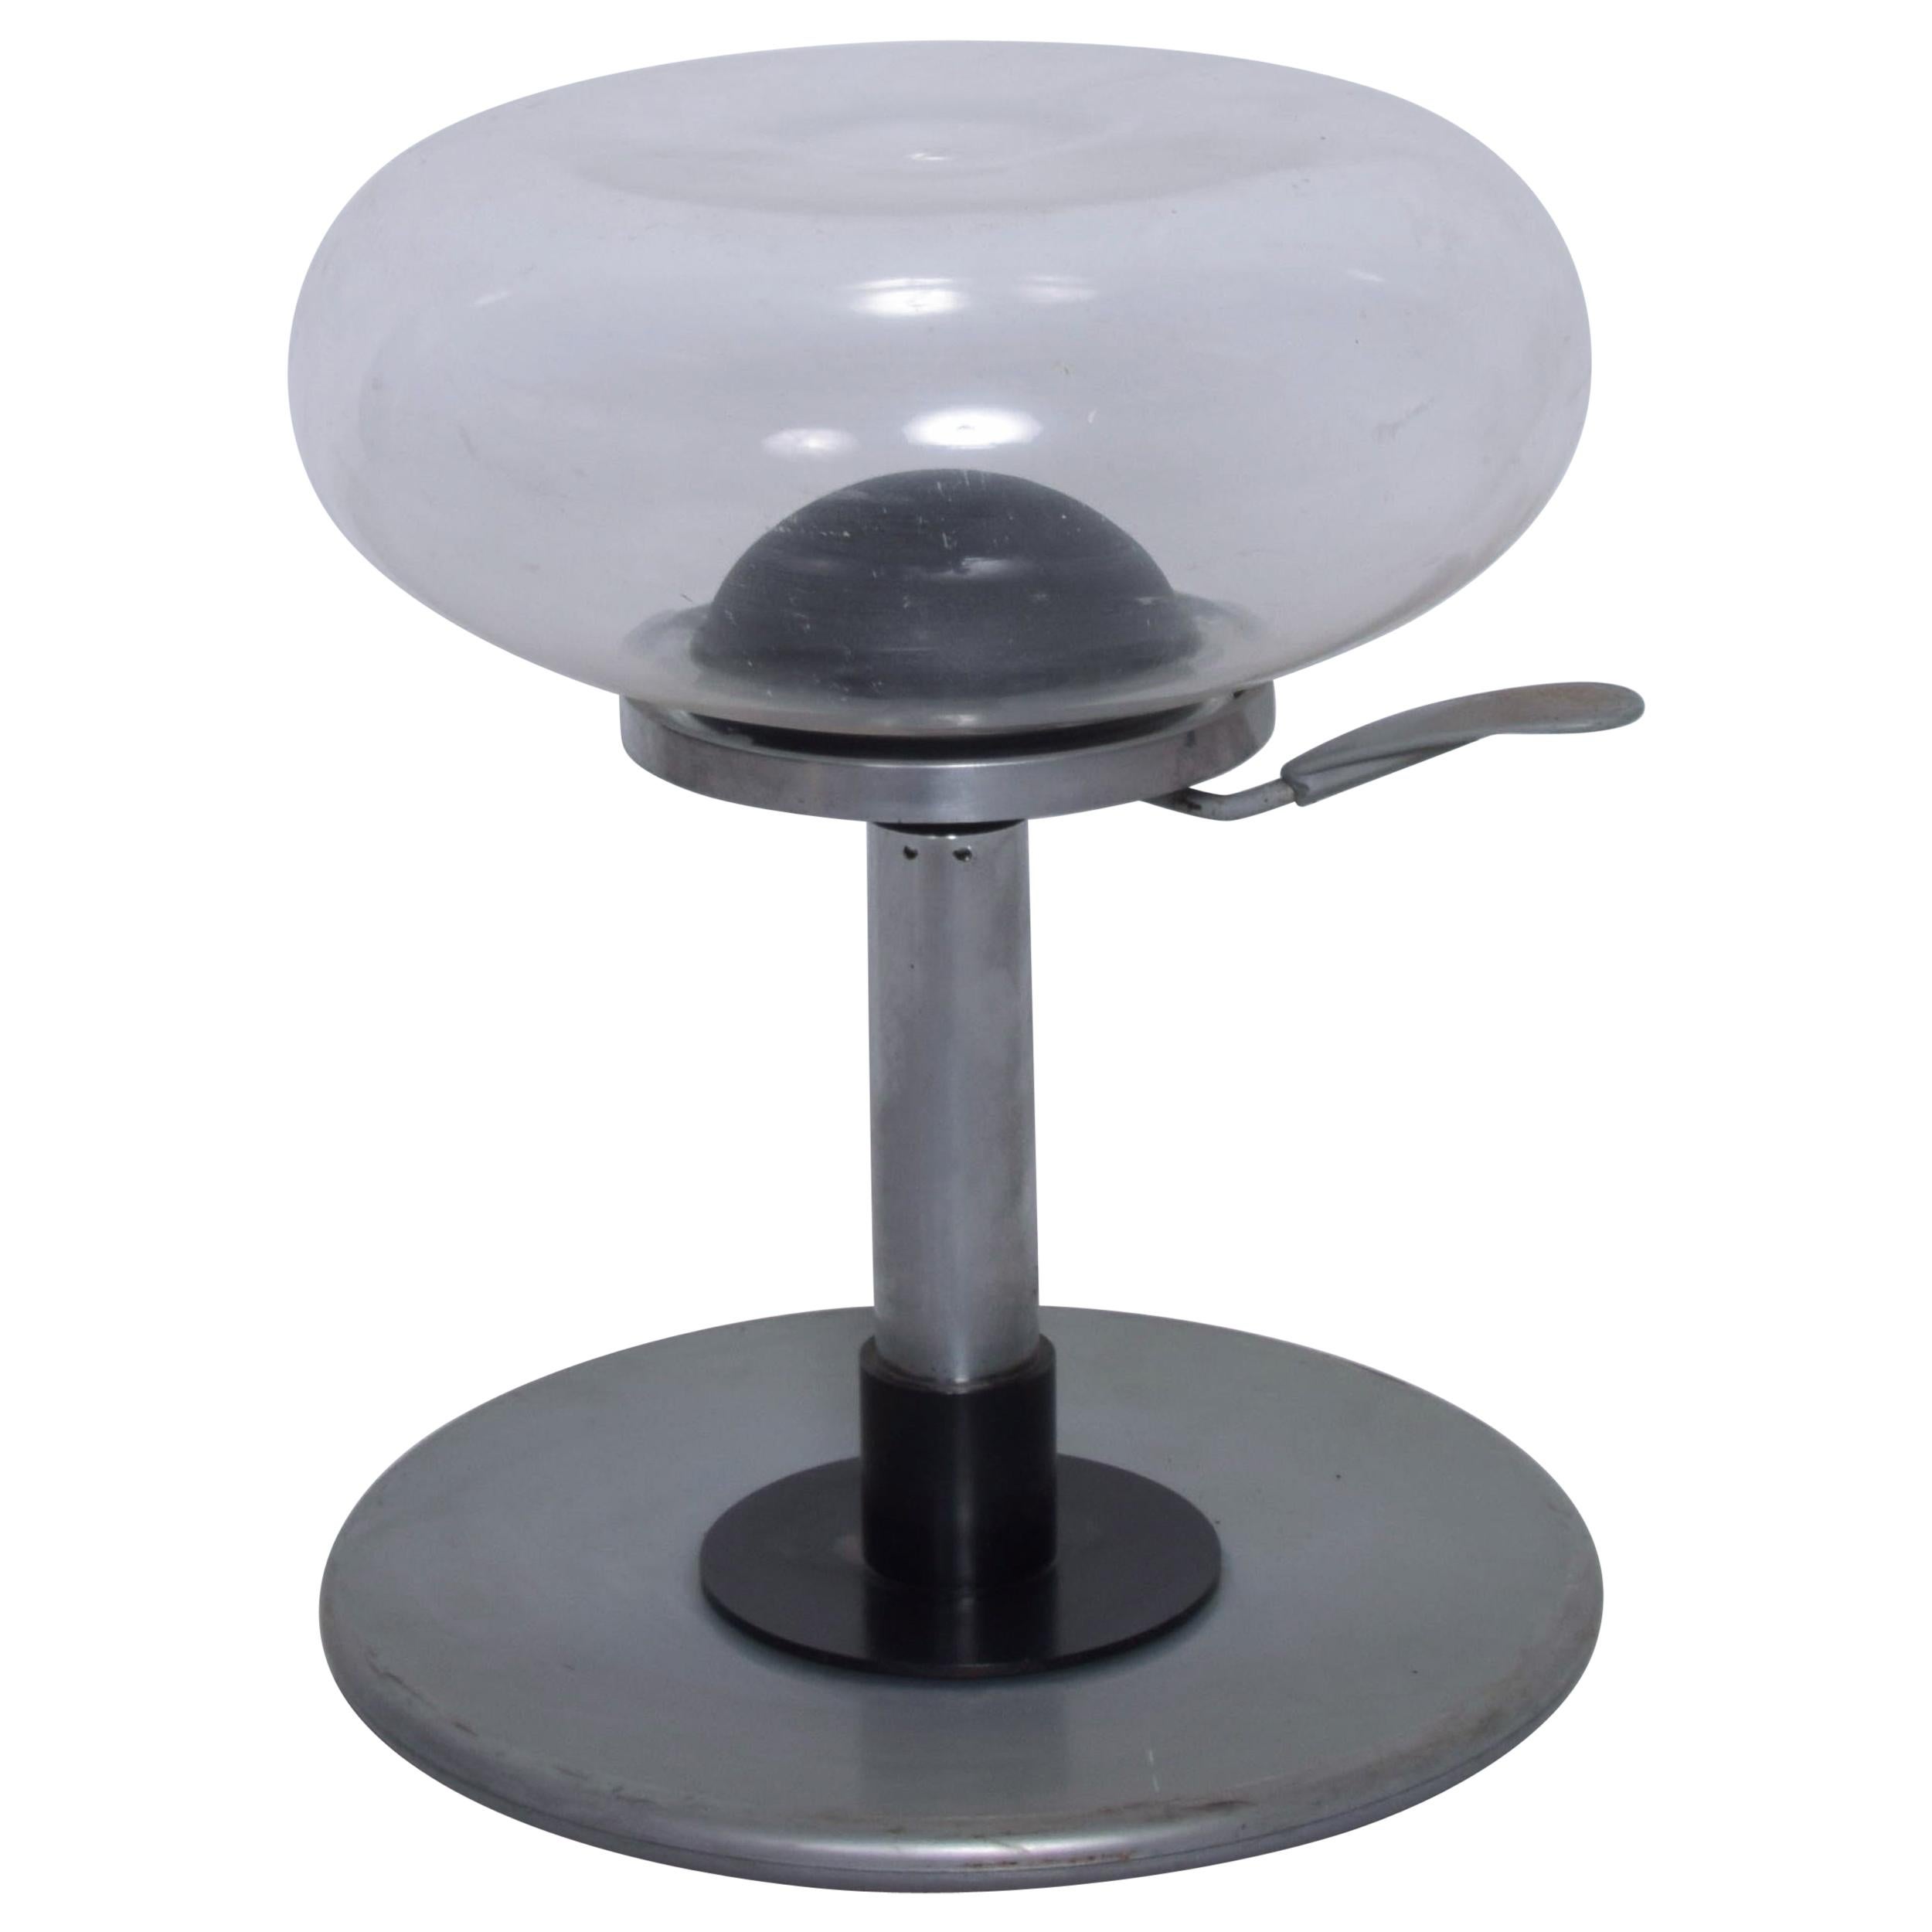 Space Age Adjustable Mambo Stool Lucite Clear Bubble Seat by Delight, Italy